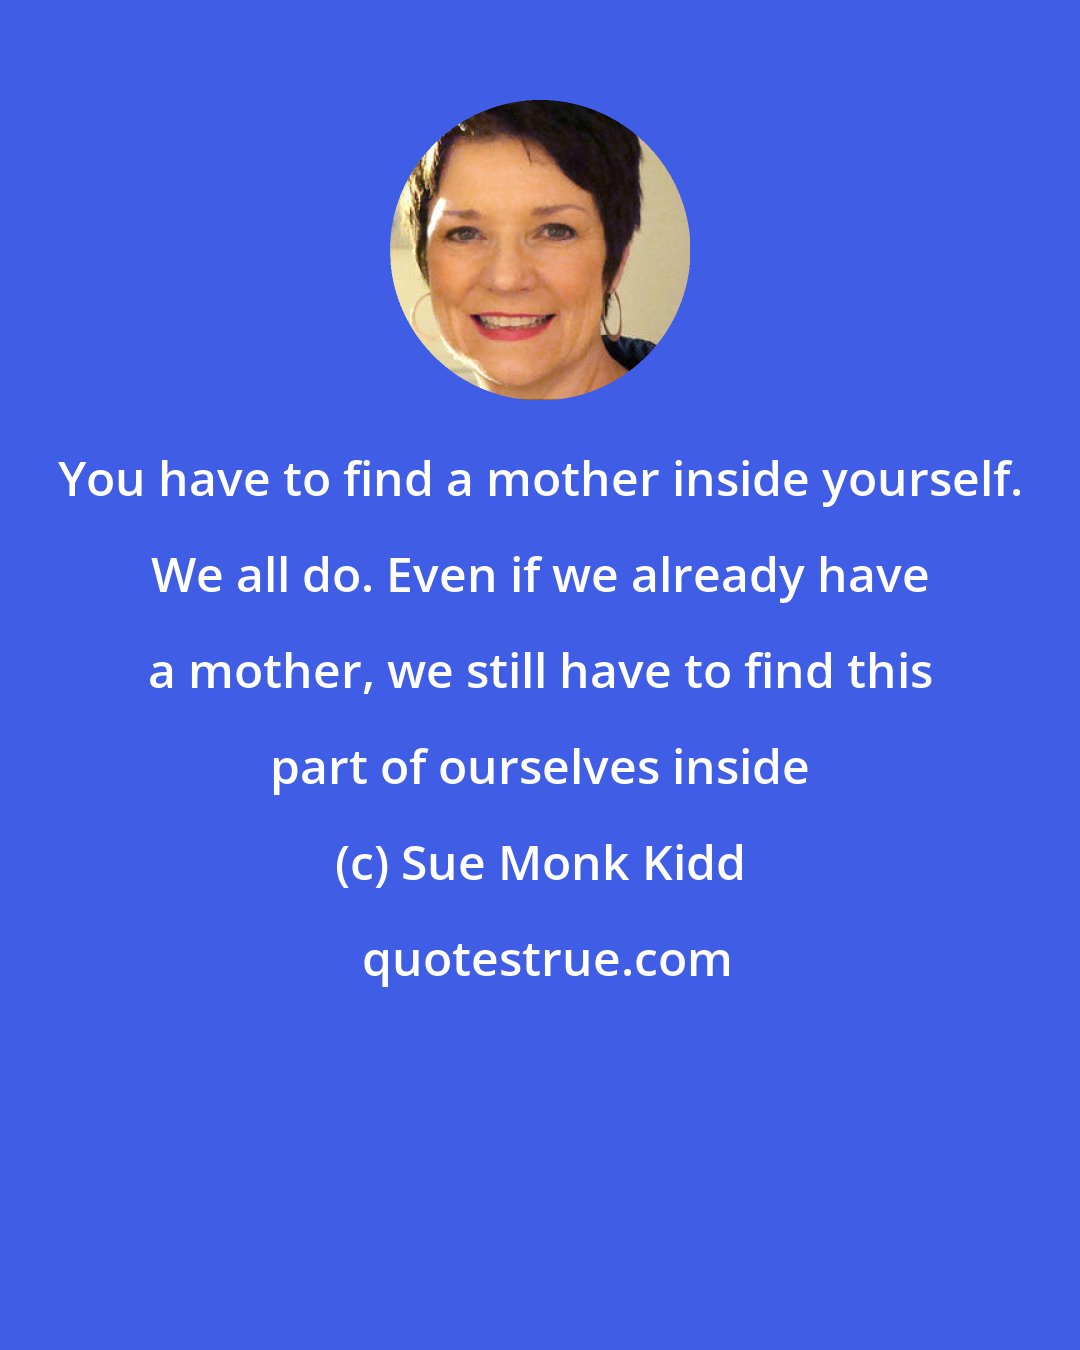 Sue Monk Kidd: You have to find a mother inside yourself. We all do. Even if we already have a mother, we still have to find this part of ourselves inside